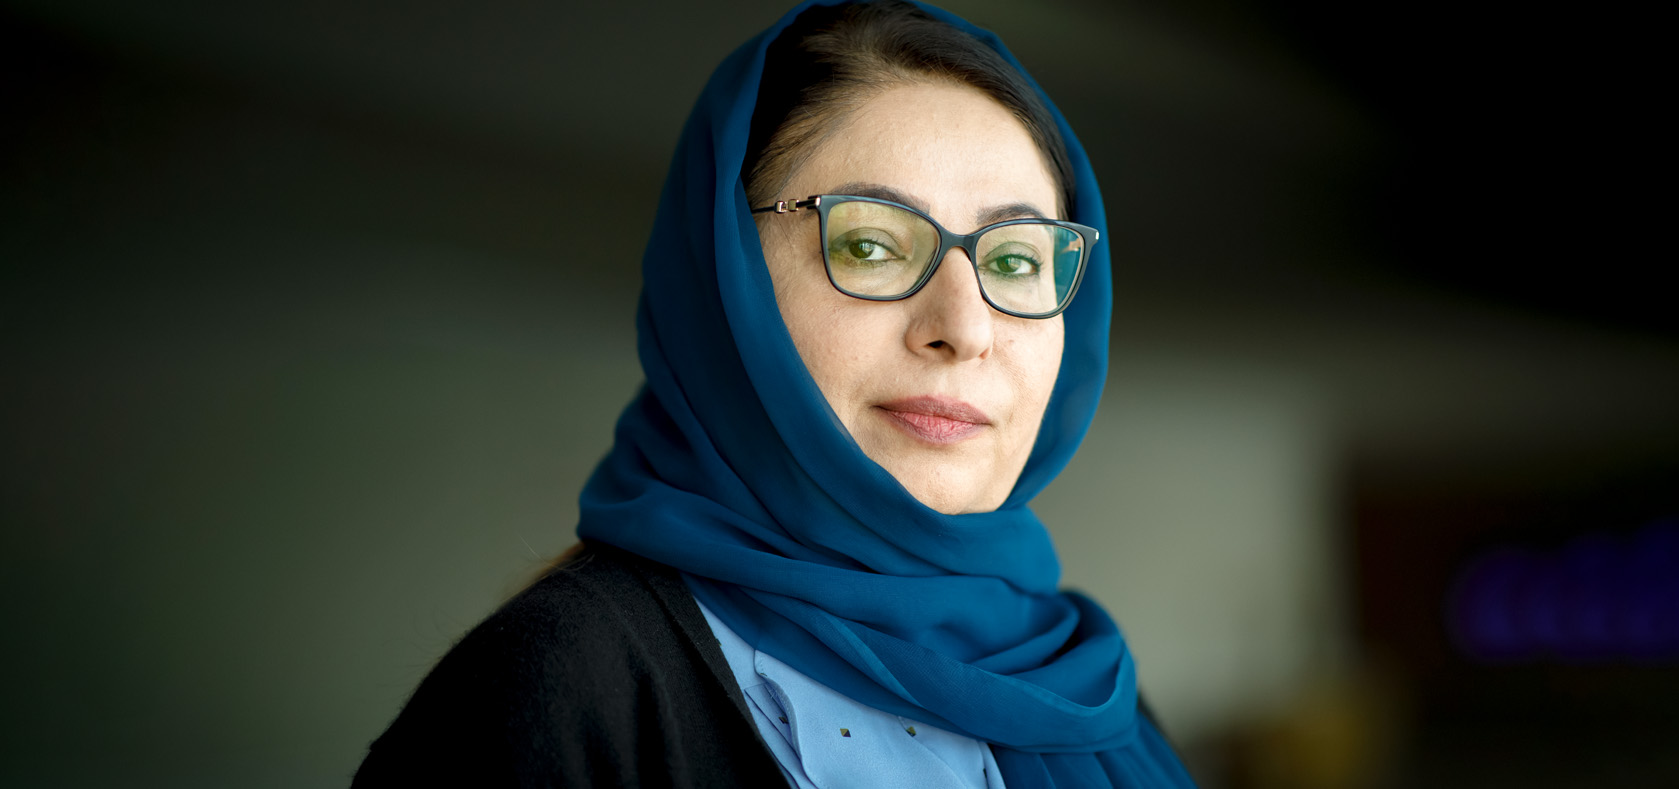 Asila Wardak, former Minister Counsellor at the Permanent Mission of Afghanistan to the United Nations and Director General of Human Rights and Women's International Affairs at the Afghan Ministry of Foreign Affairs. Photo: UN Women/Ryan Brown